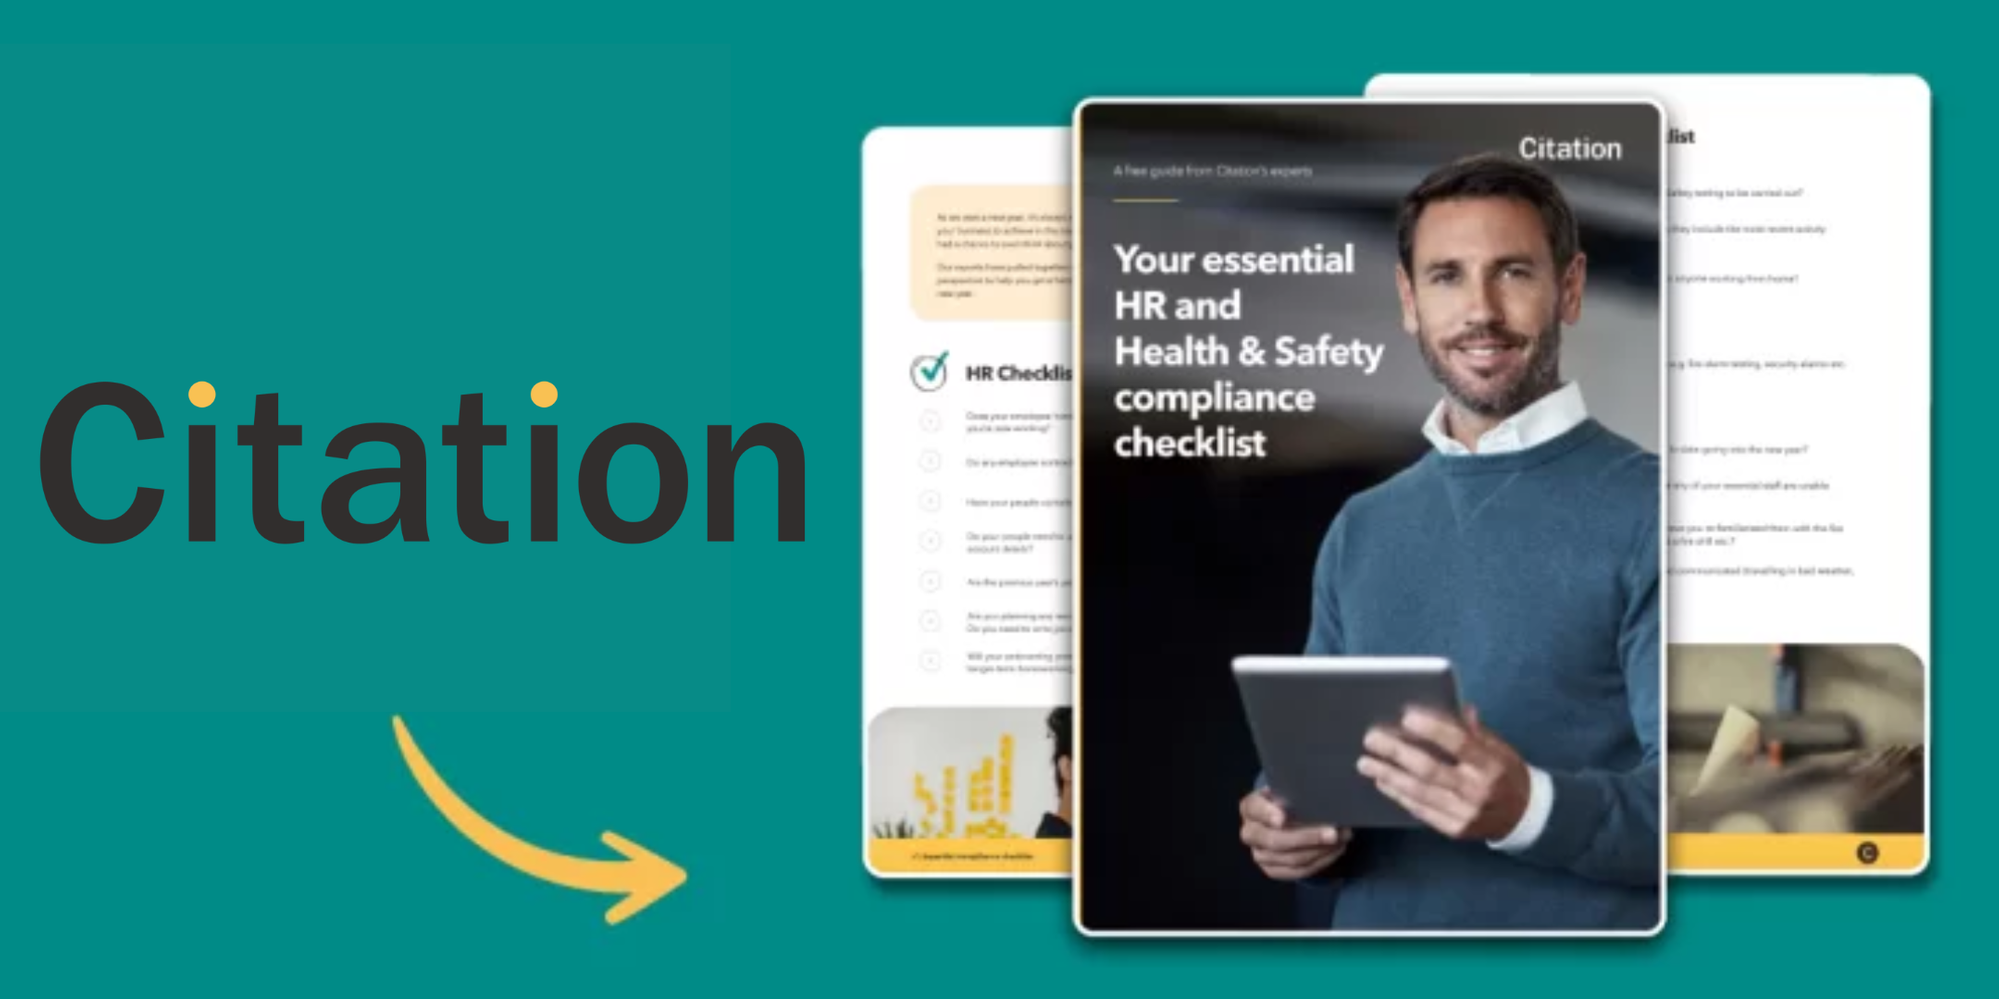 Nail HR and Health & Safety compliance with this free Citation checklist